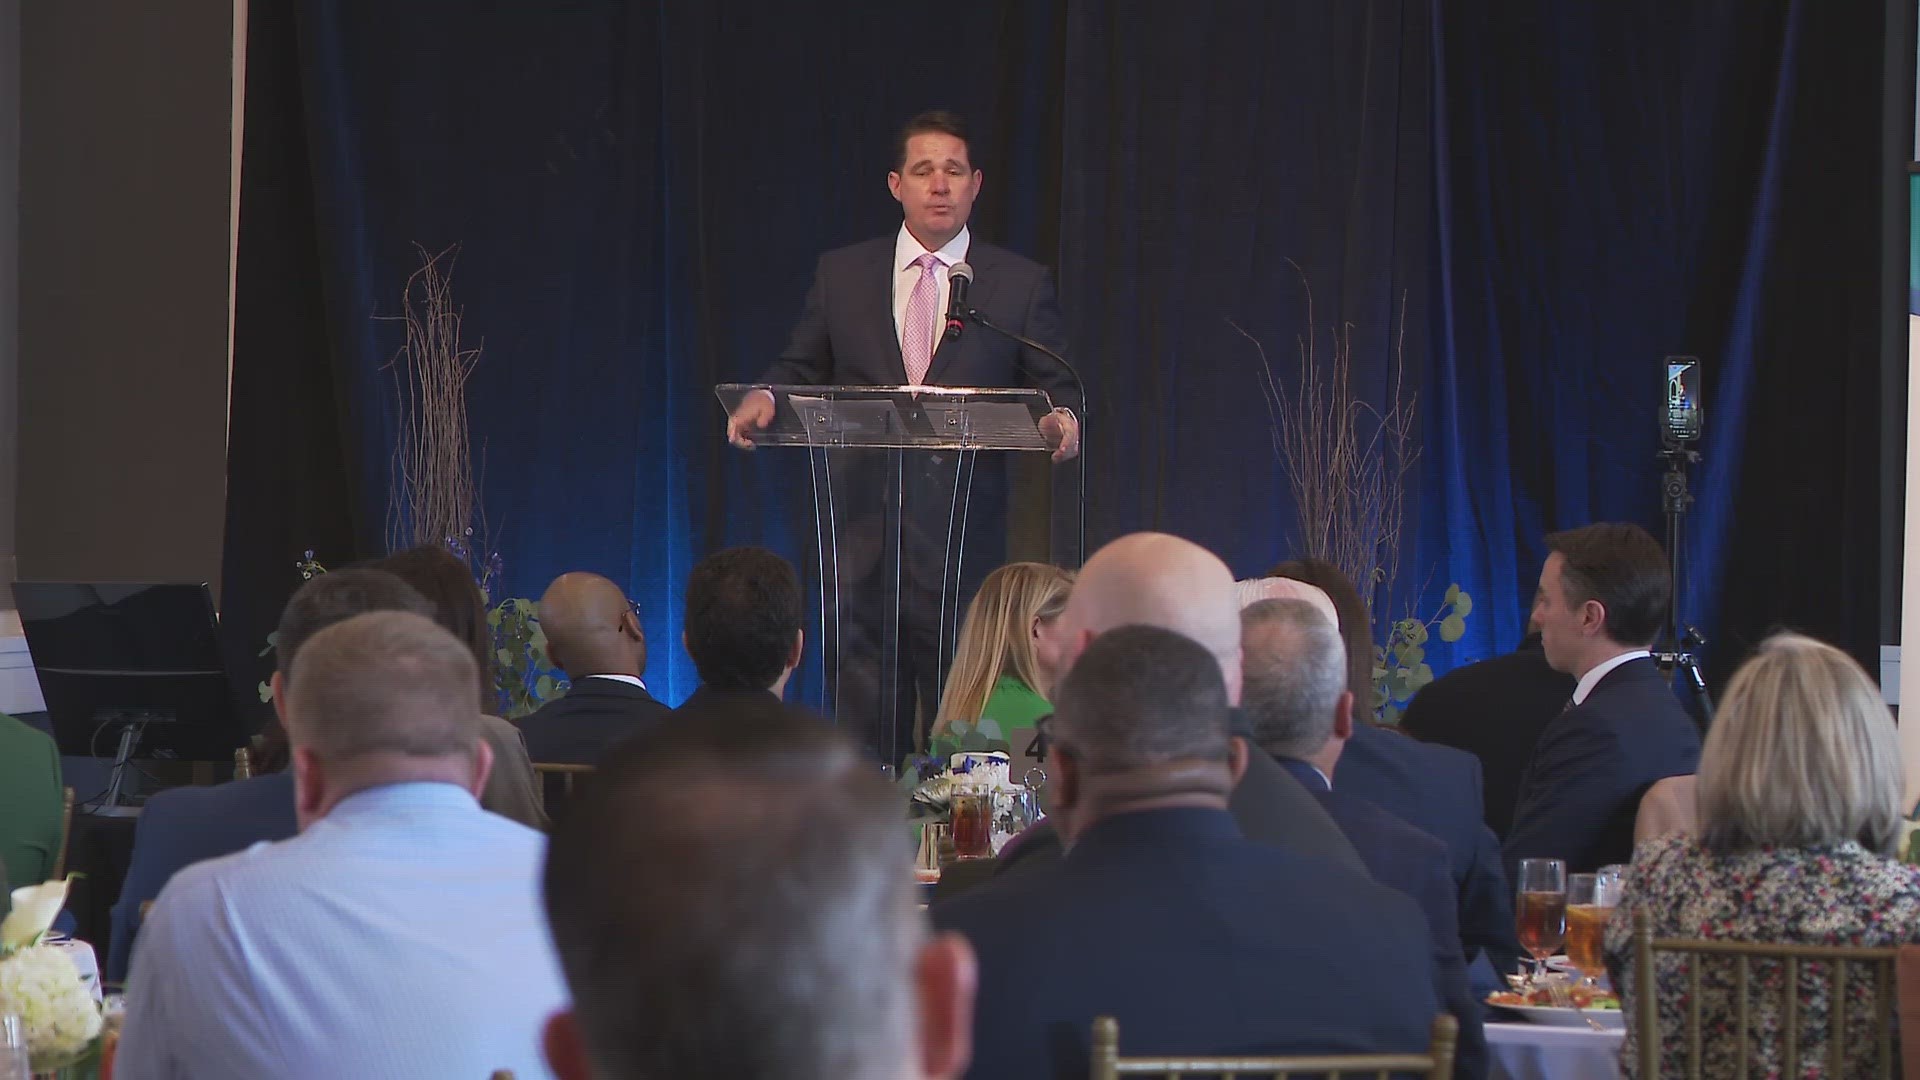 The district's challenges continue with the potential for state oversight, but Superintendent Marty Pollio used his speech on Tuesday to push back.